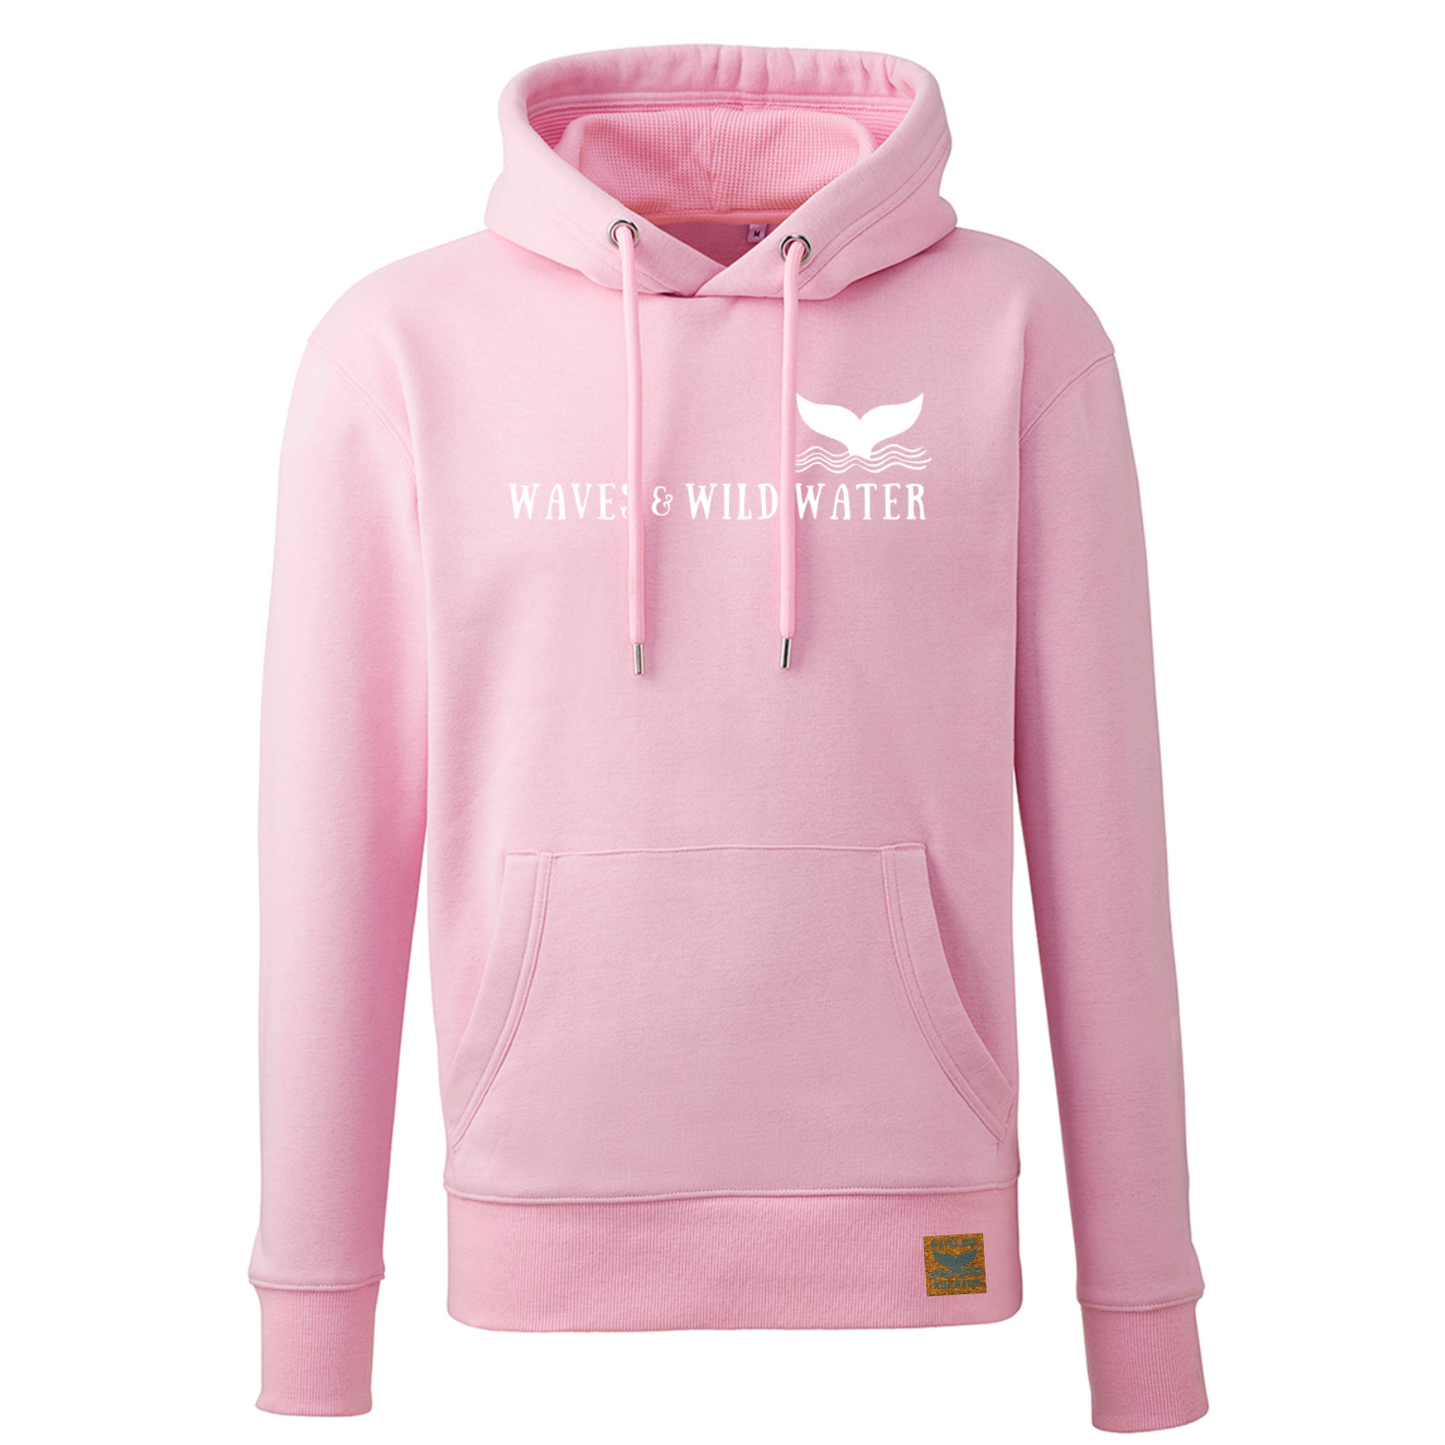 This is a gorgeous pink hoodie from our Beach Hut Hoodies collection. It has a same colour inner hood and draw cord, and has the Waves and Wild Water name and whale tail logo printed across the front in white chemical free ink. Inspired by the British coast and perfect for warming up after a dip in the sea.